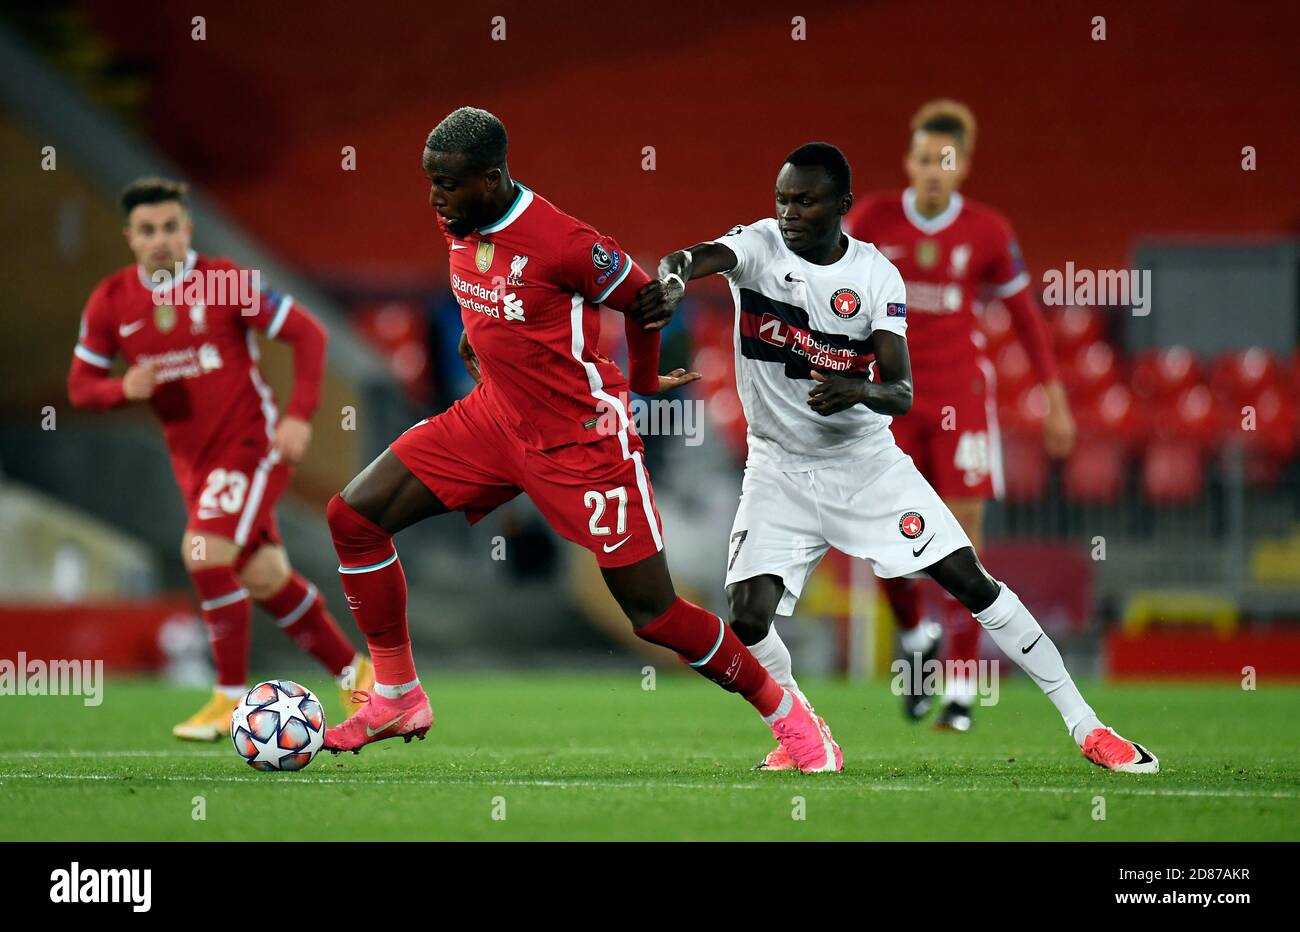 Liverpool's Divock Origi (left) and FC Midtjylland's Pione Sisto during the UEFA Champions League Group D match at Anfield, Liverpool. Stock Photo